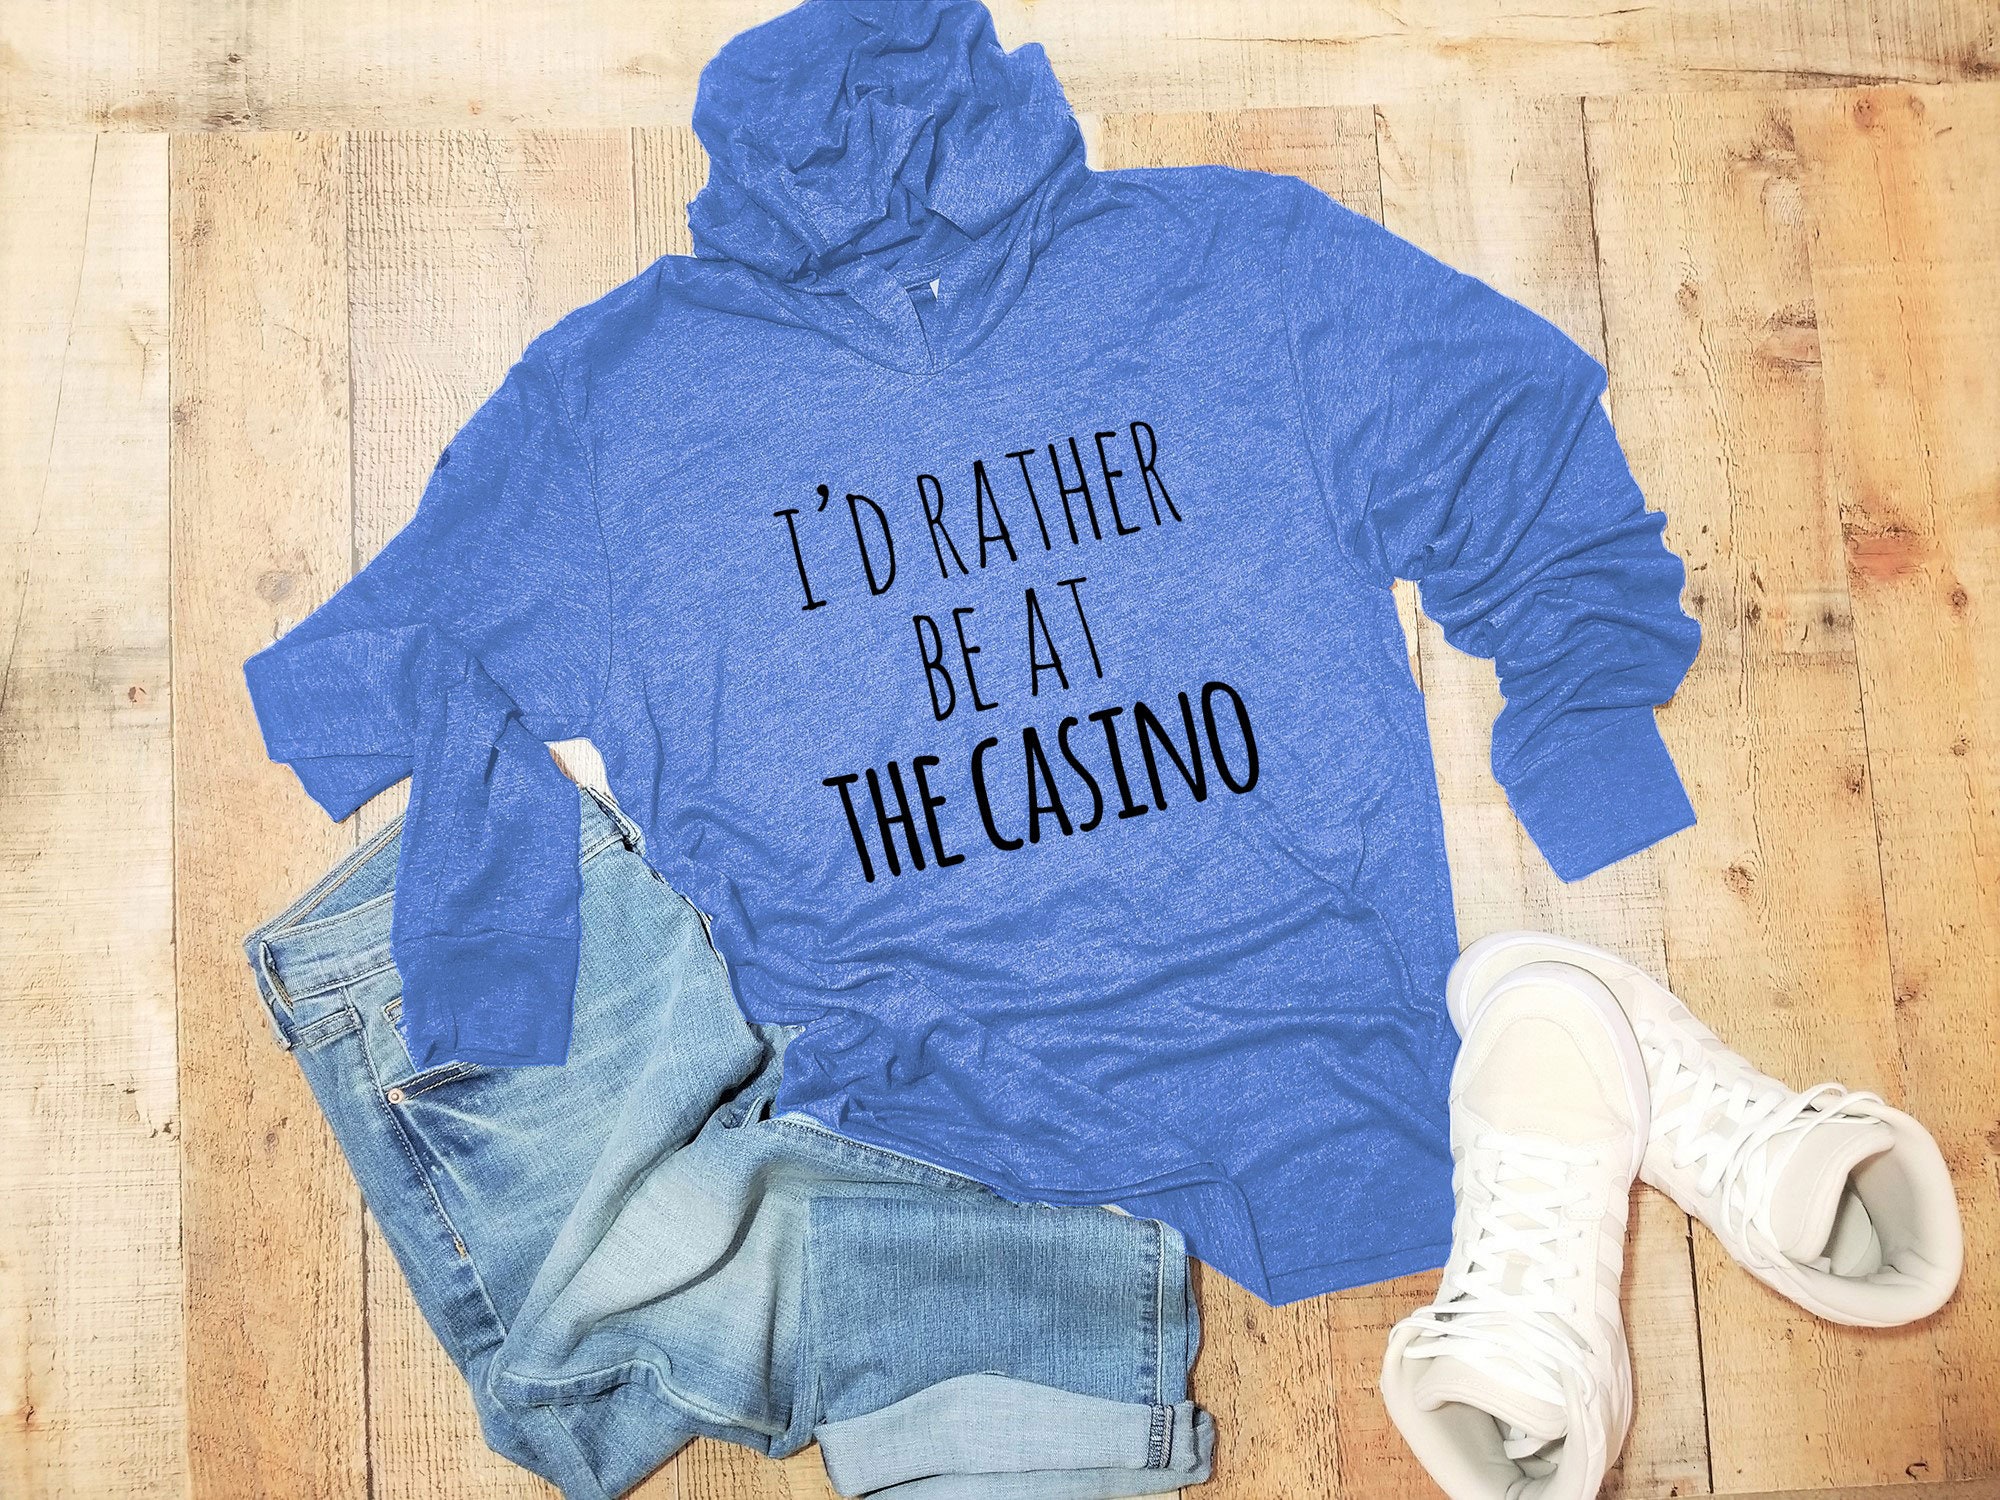 Distressed Typography Design Short-Sleeve Unisex T-Shirt I'd Rather Be At The Casino